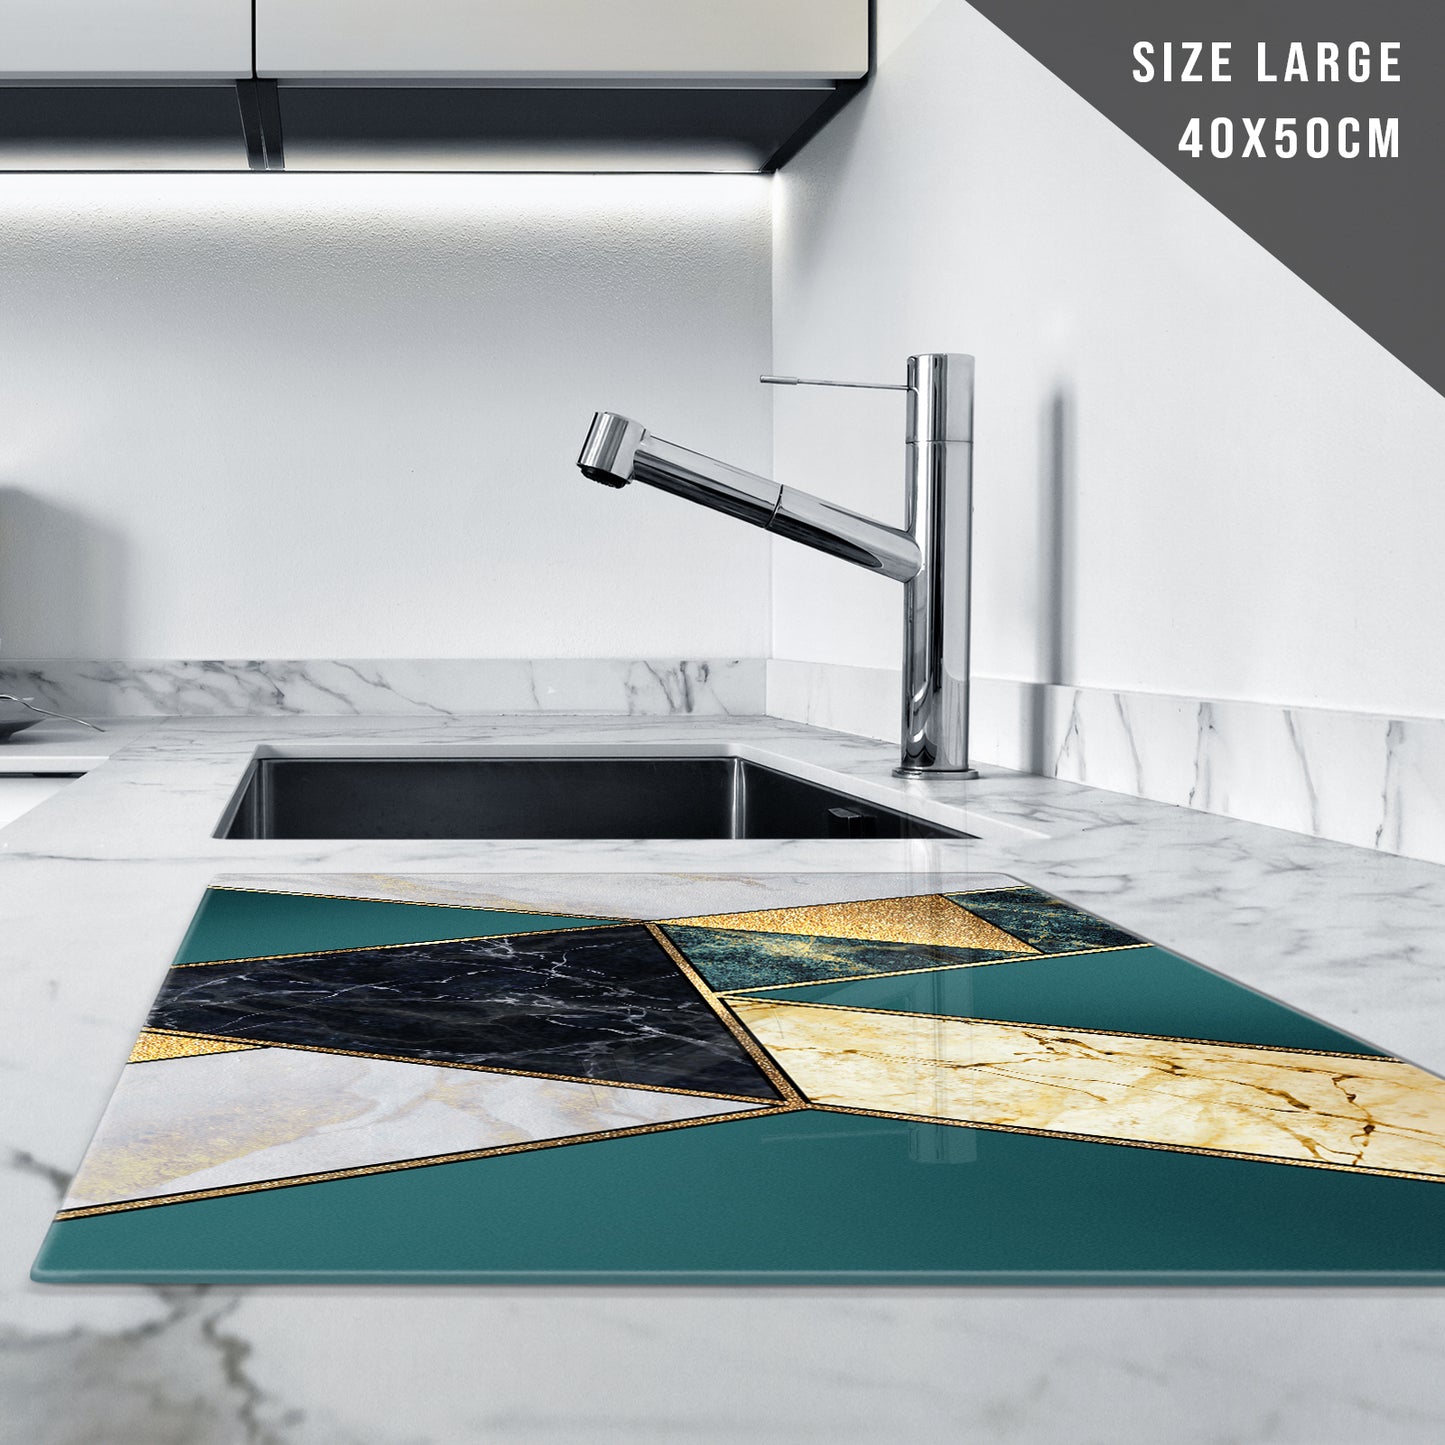 Glass Chopping Board for Kitchen in Geometric Teal Black Gold design